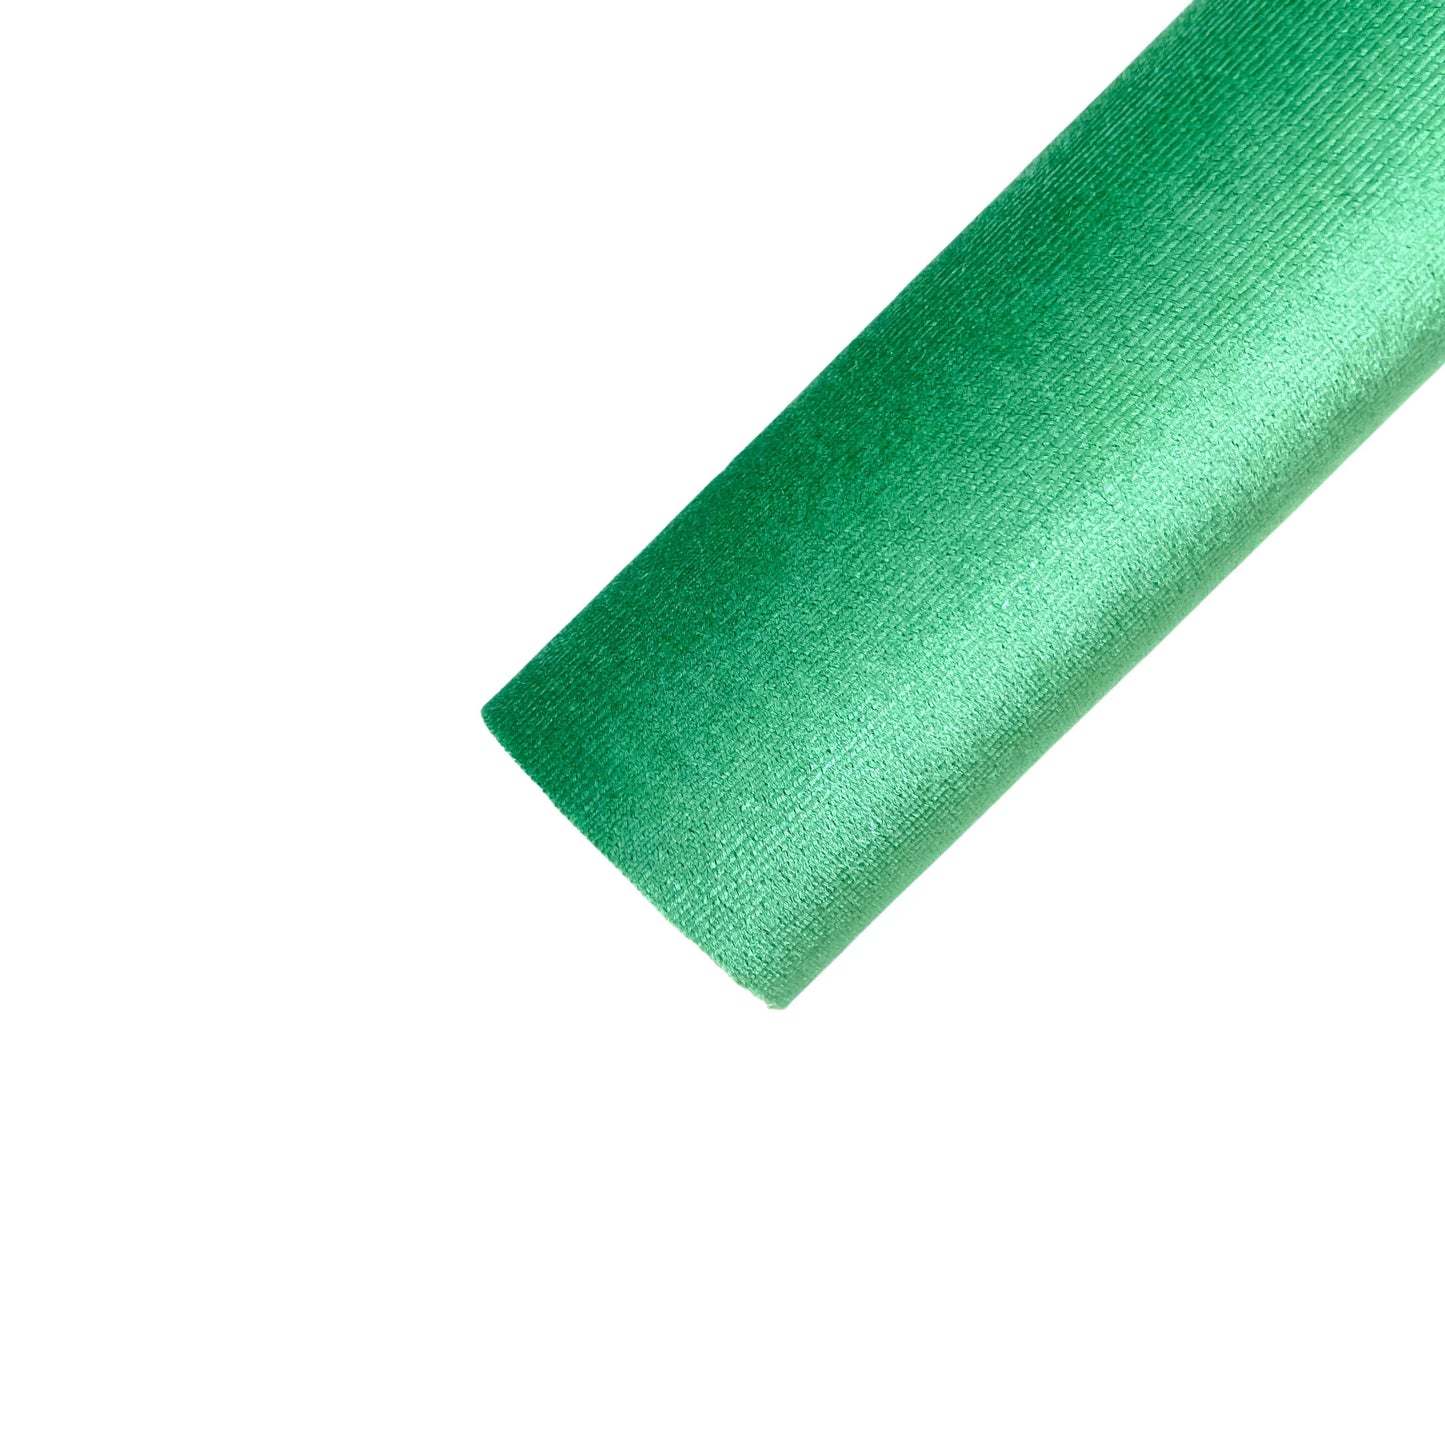 Rolled solid colored velvet sheet in St. Patrick's day green.